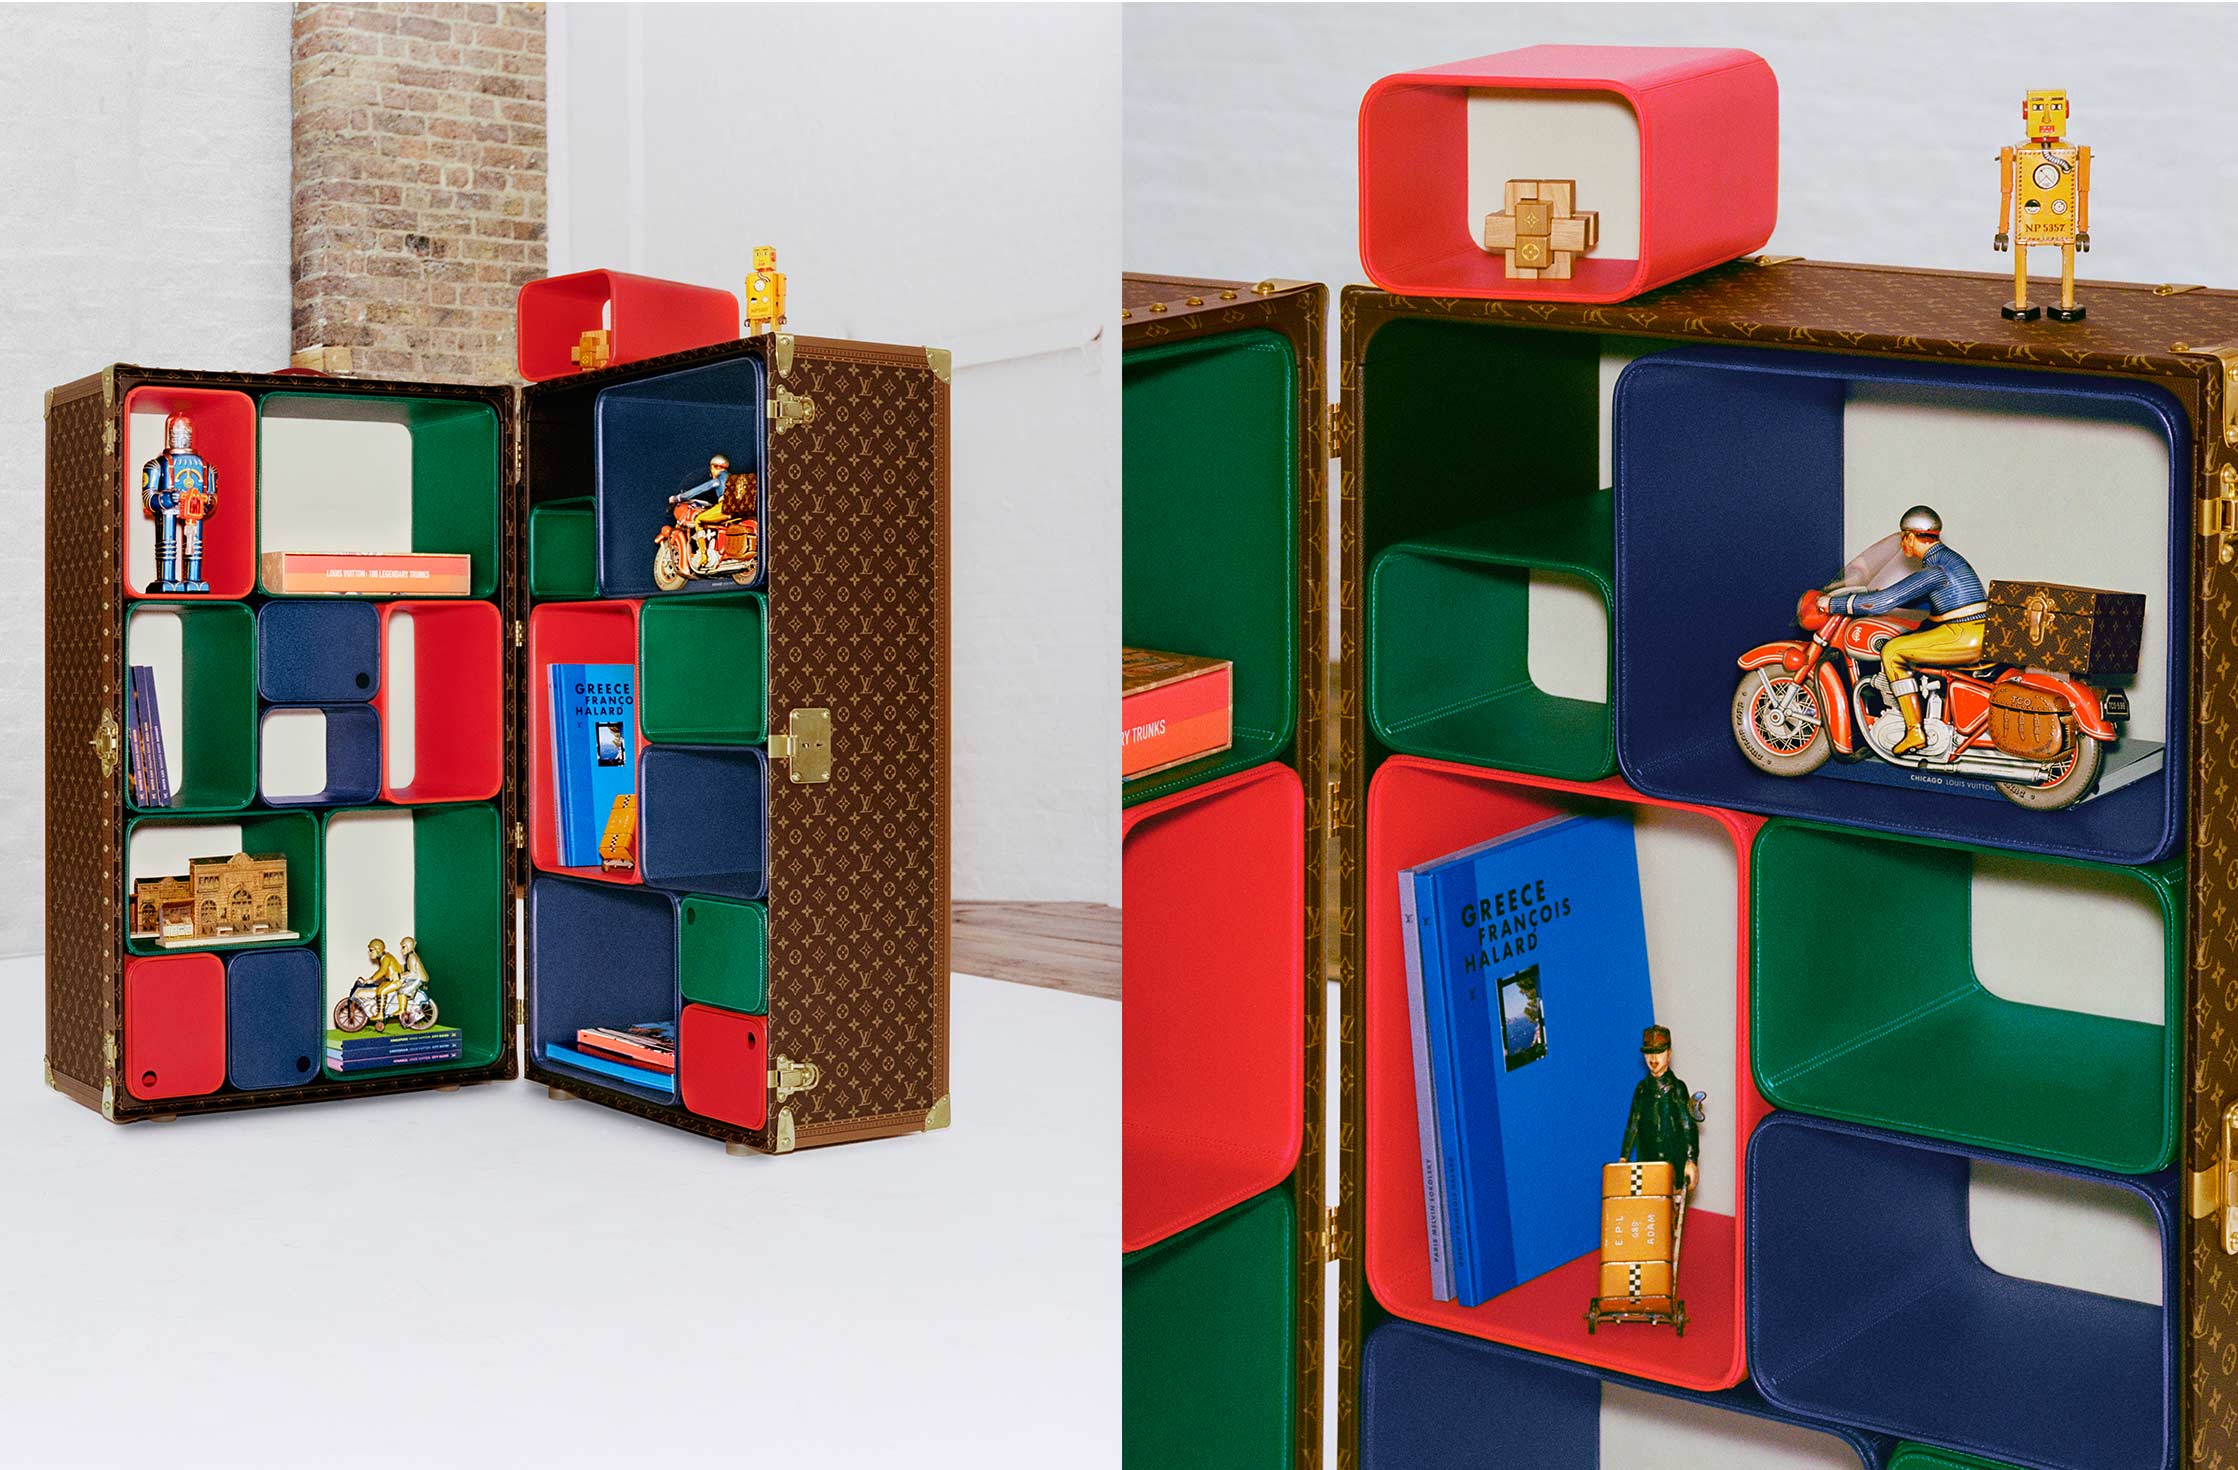 Marc Newson reimagines the iconic Louis Vuitton trunk with